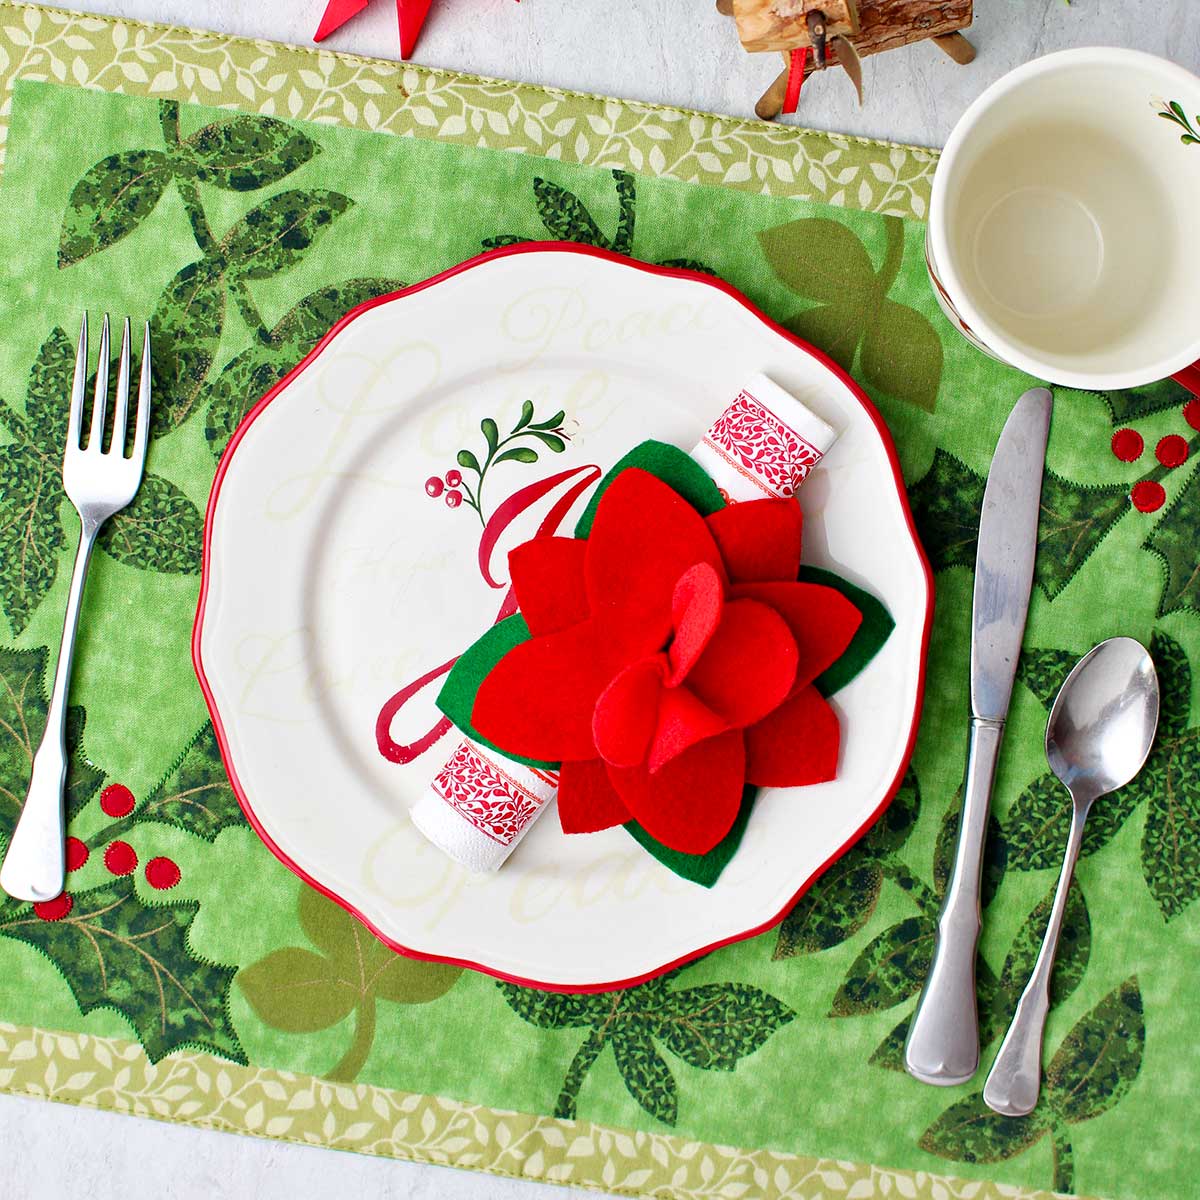 19 Festive Christmas Napkin Ideas to Upgrade Your Holiday Table